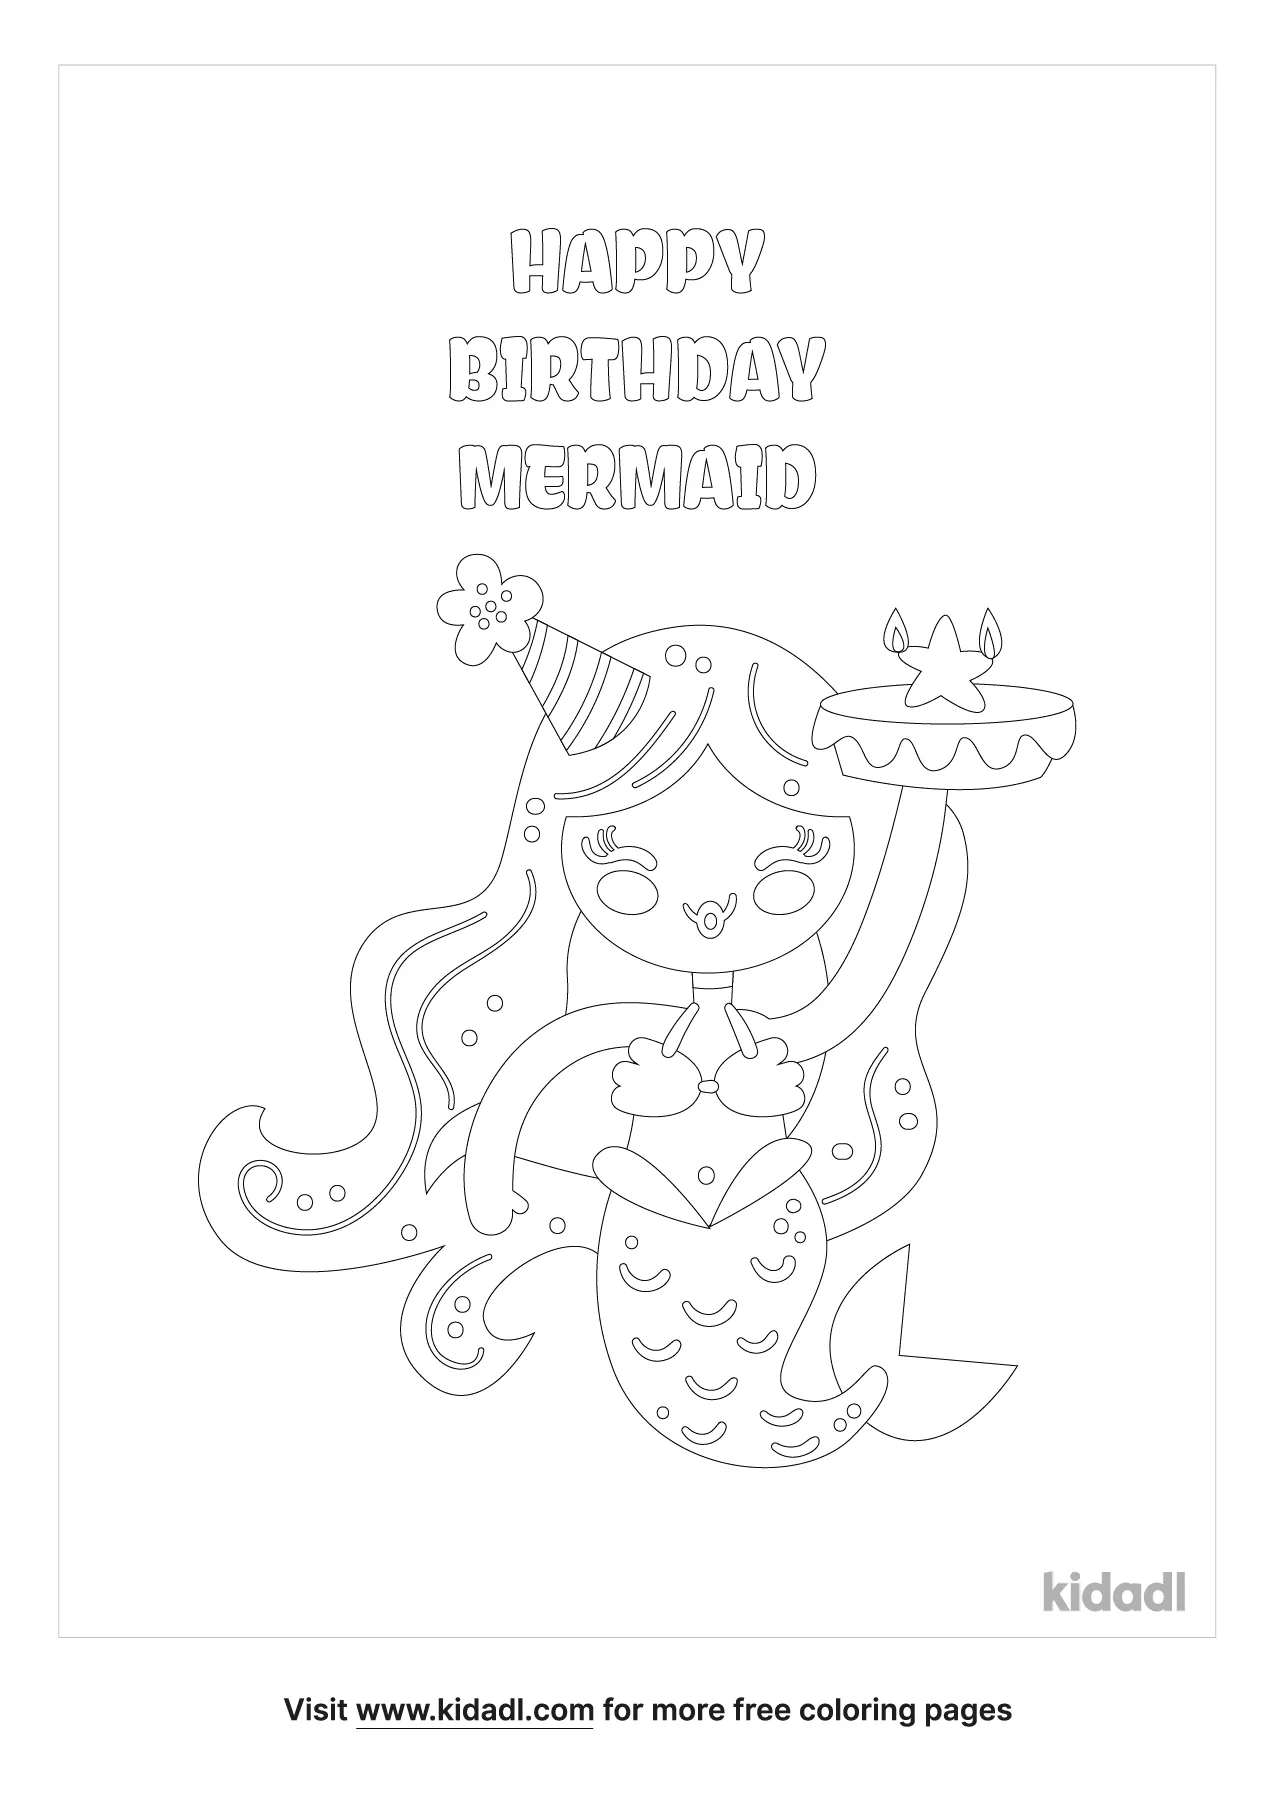 Happy Birthday Mermaids Coloring Page